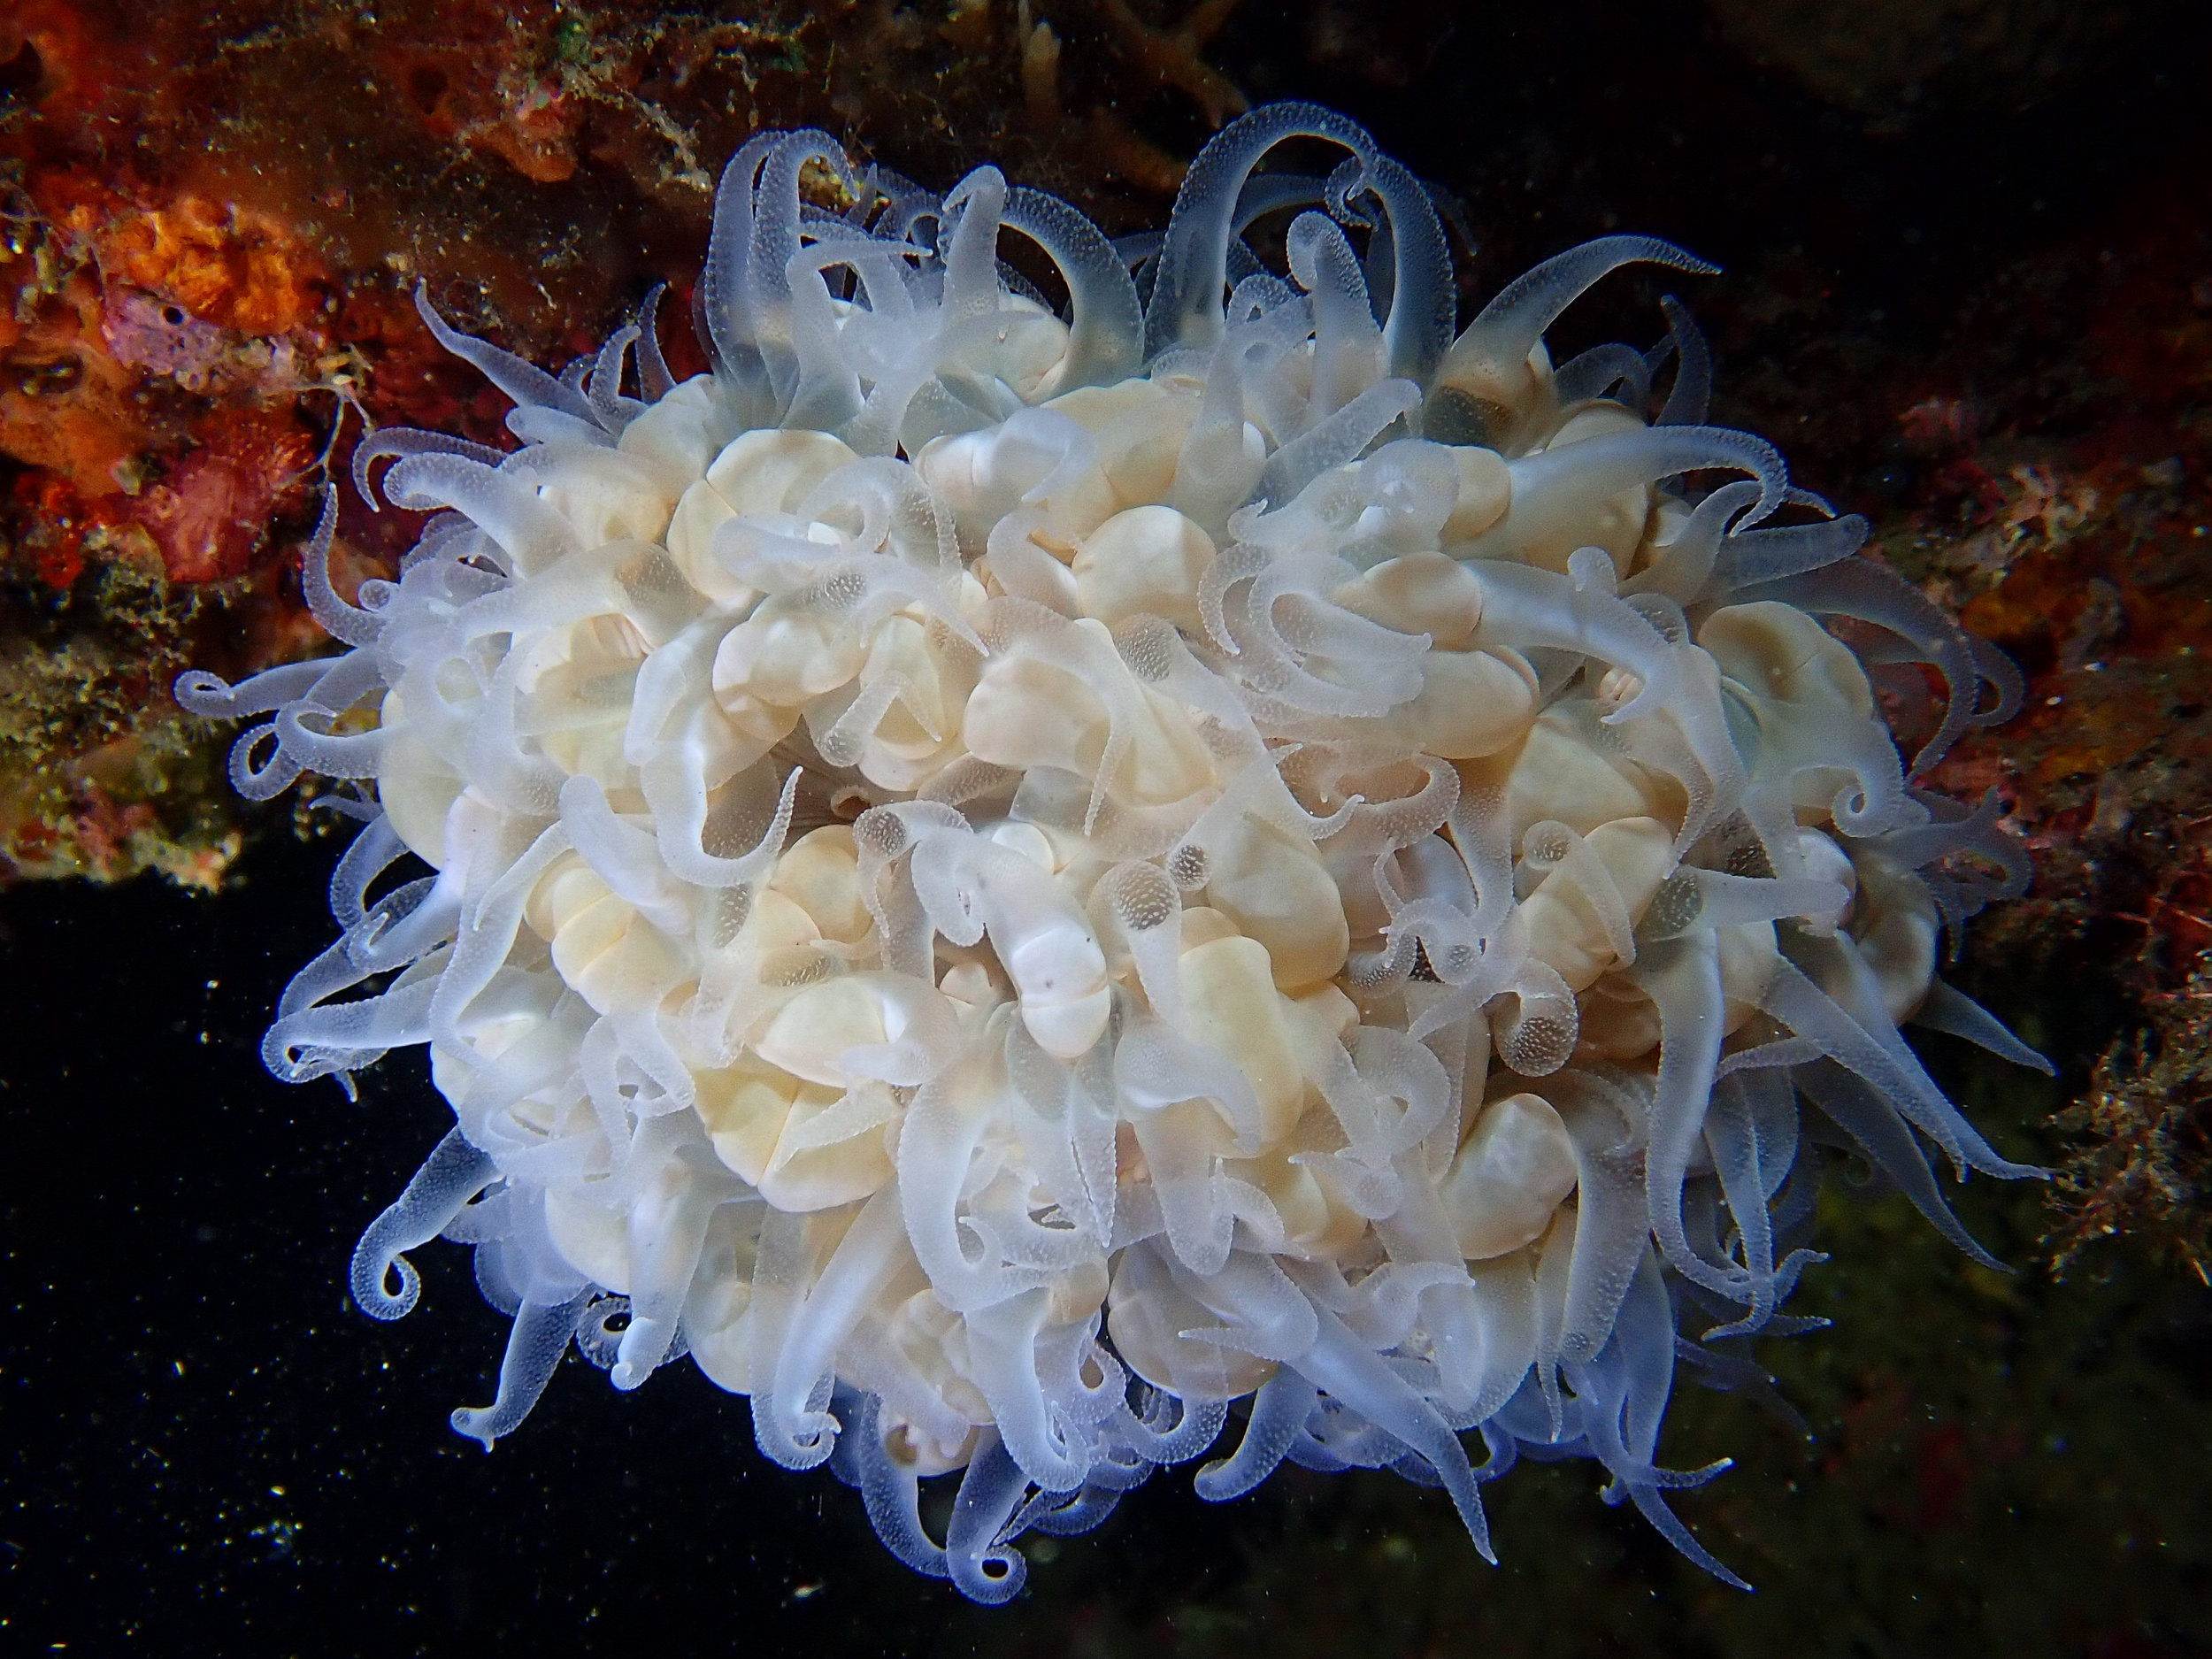 Boloceroides mcmurrichi swimming anemone, The Crater, Witu Islands